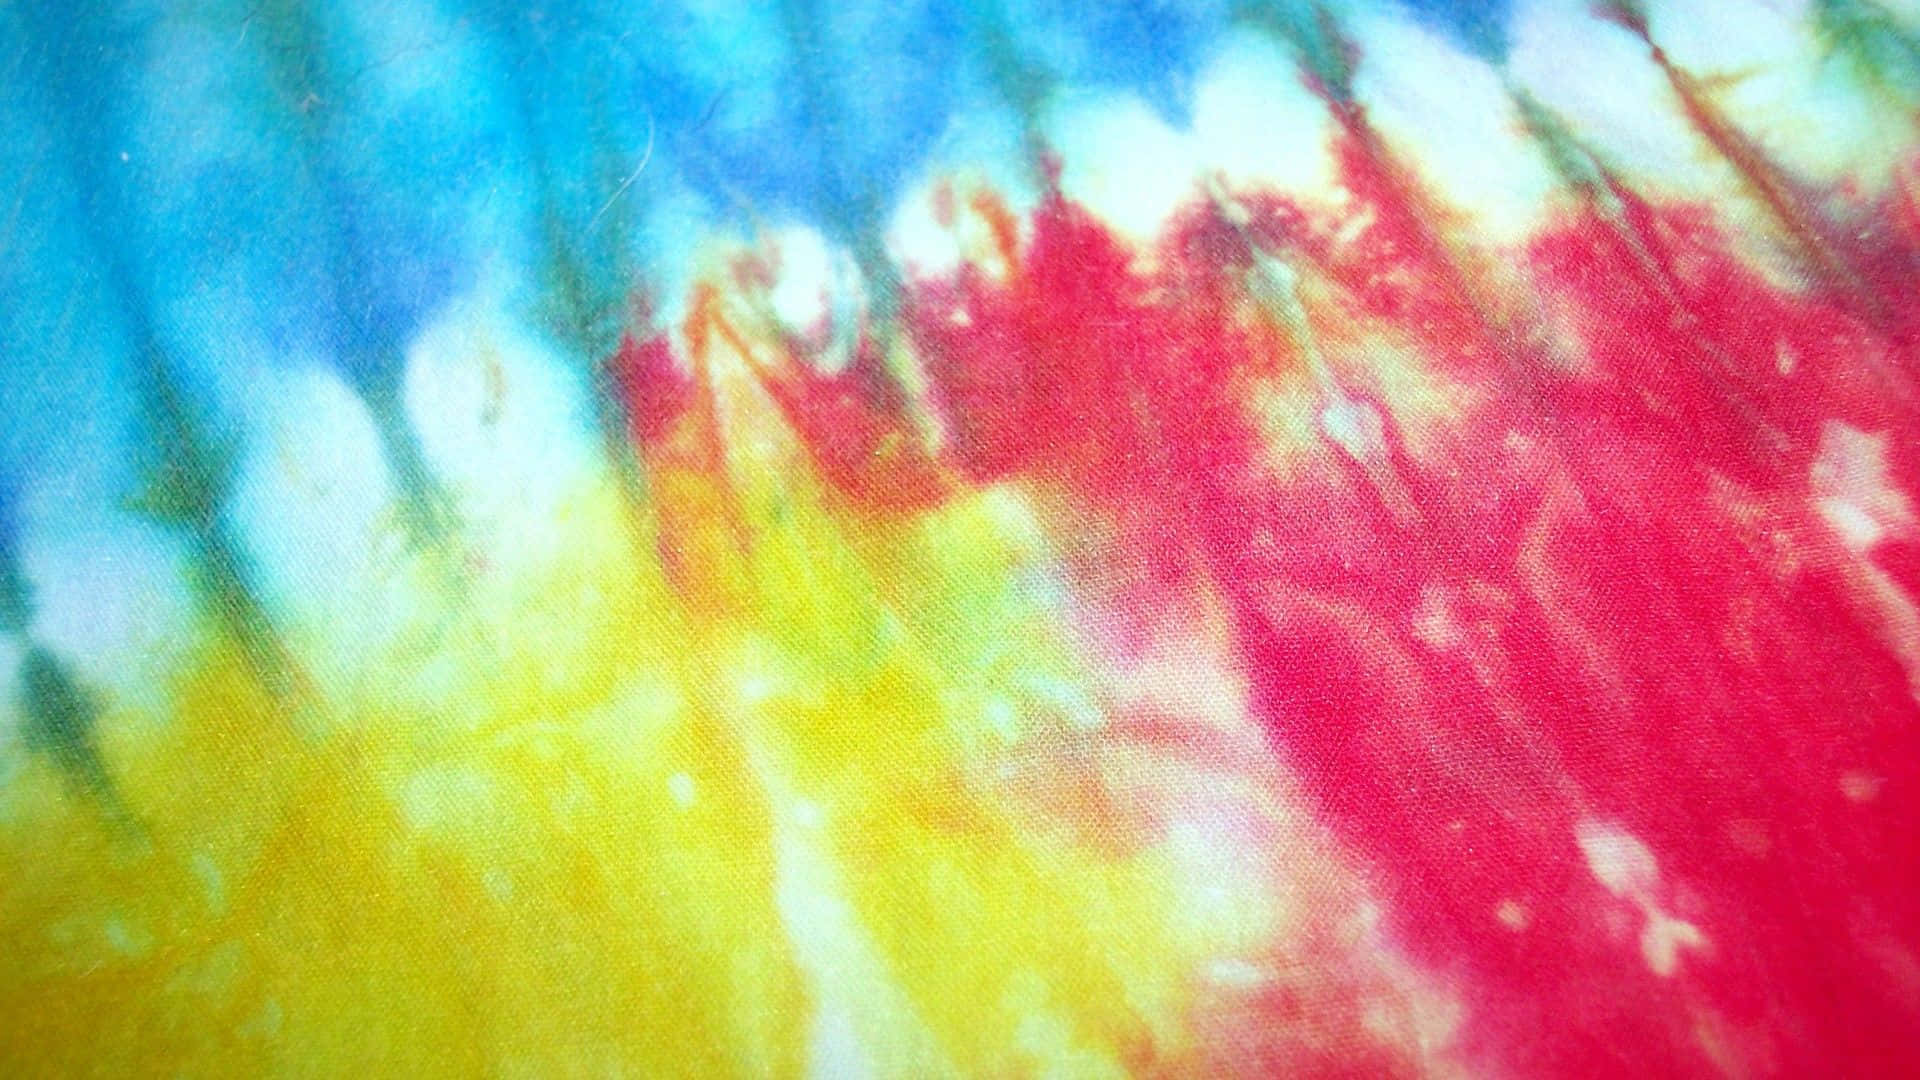 "Stand Out From the Crowd with Vibrant Tie Dye!"